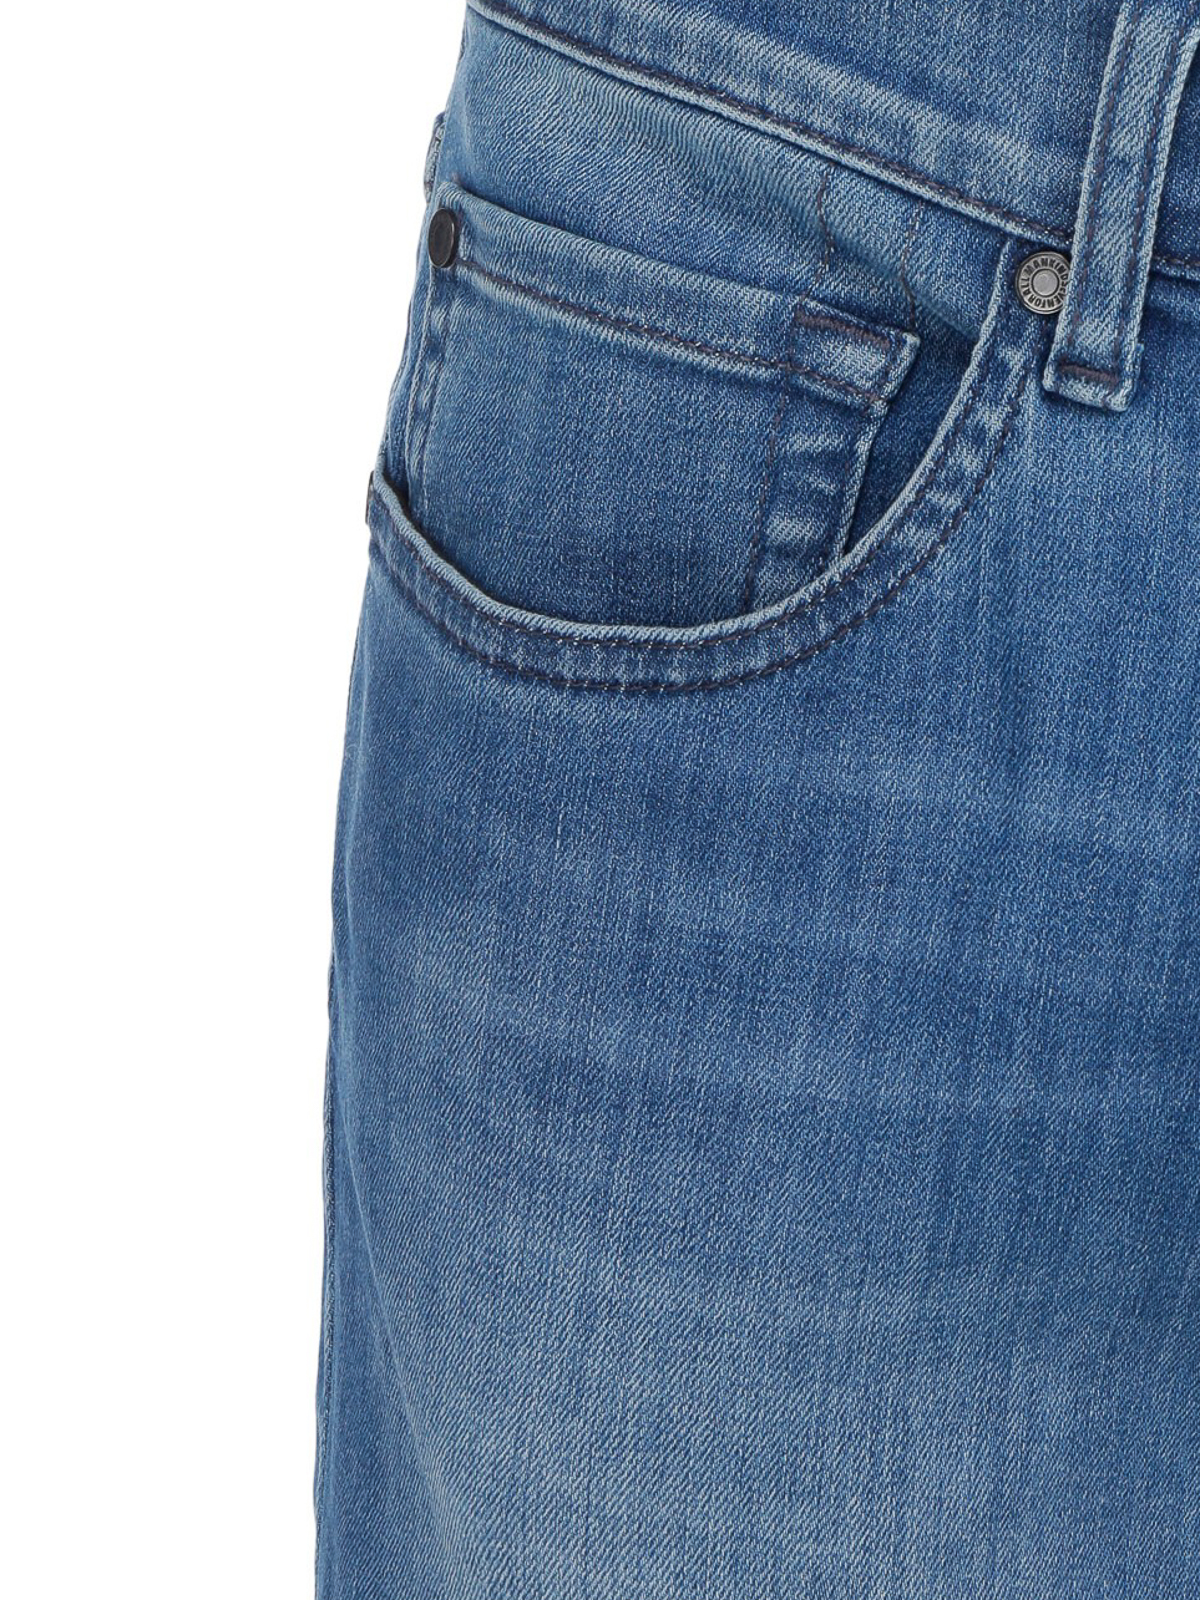 Straight leg jeans 7 For All Mankind - Luxe Performance jeans - JSMSR750PM